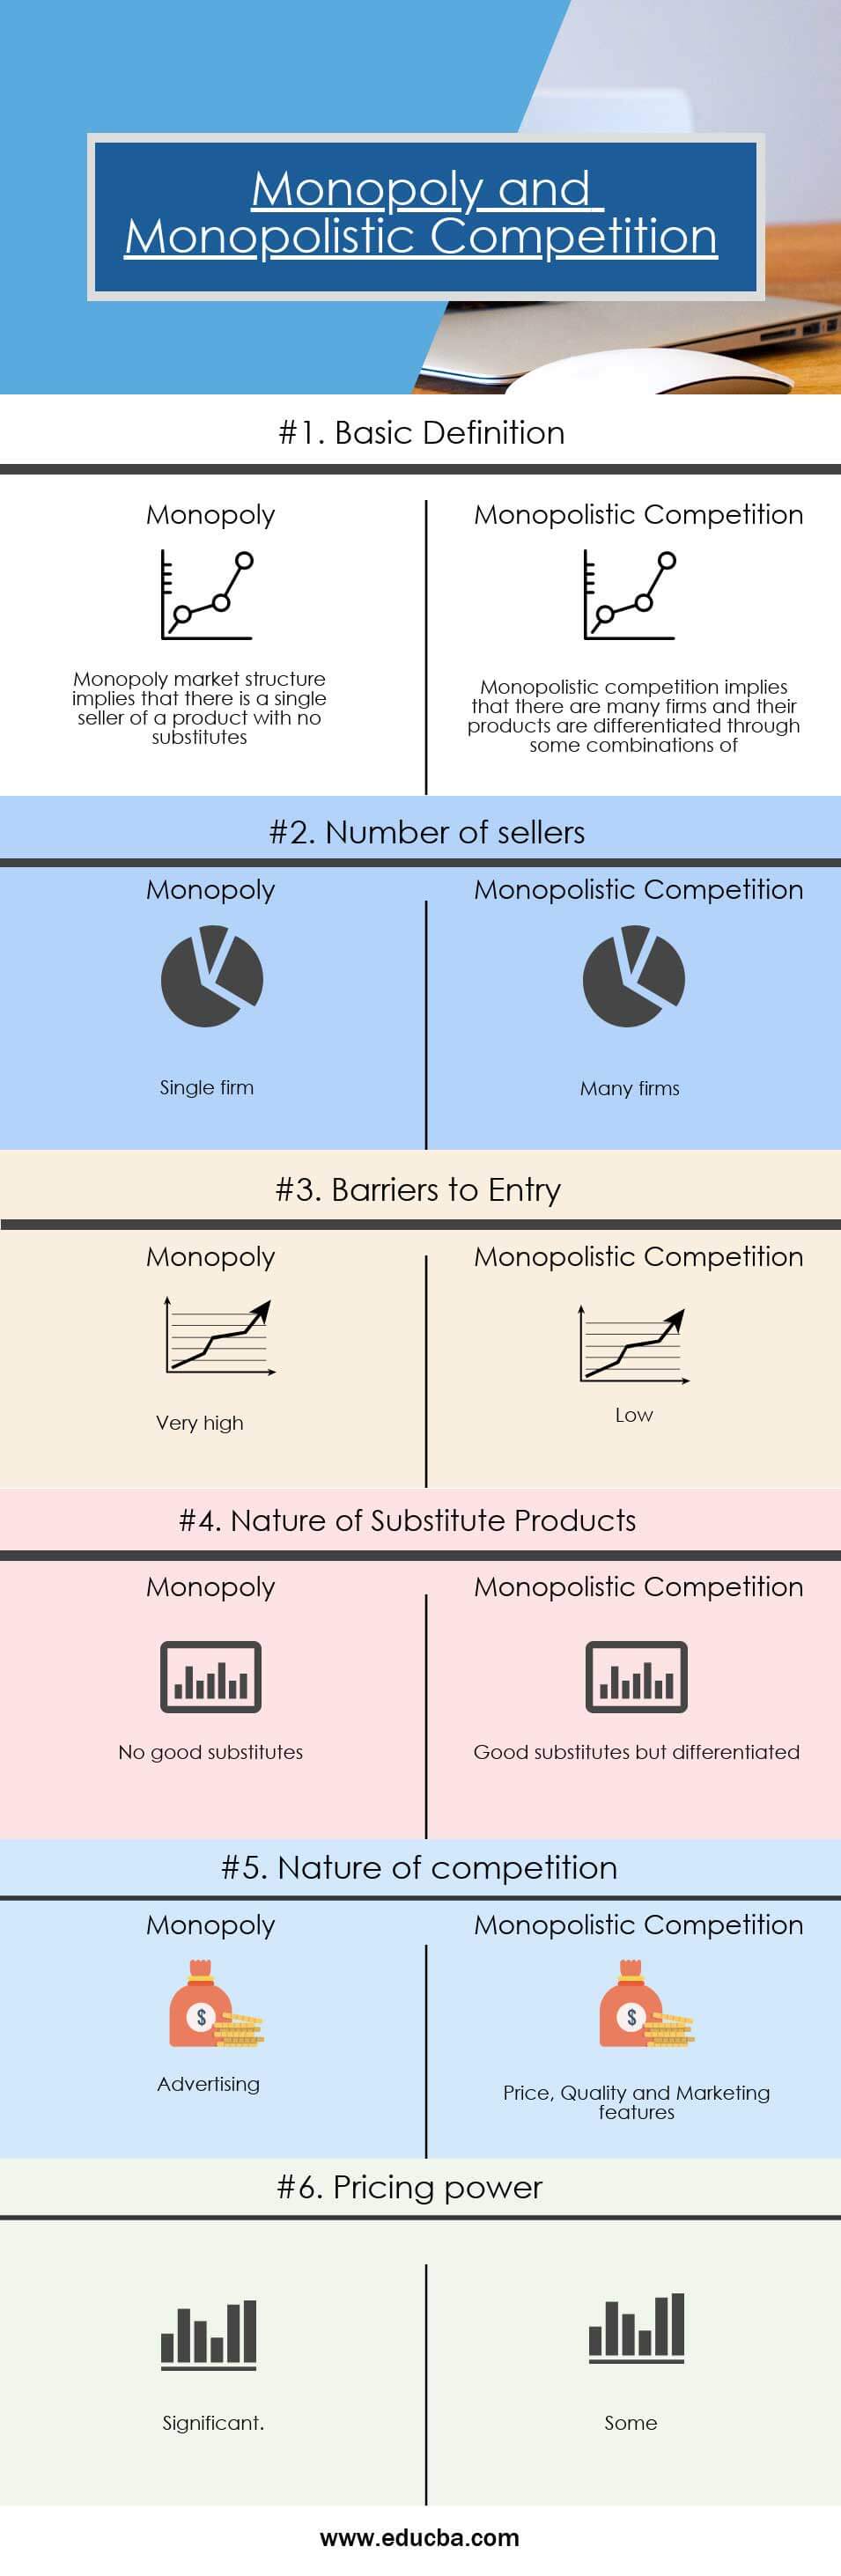 Comparison between Monopoly and Monopolistic Competition